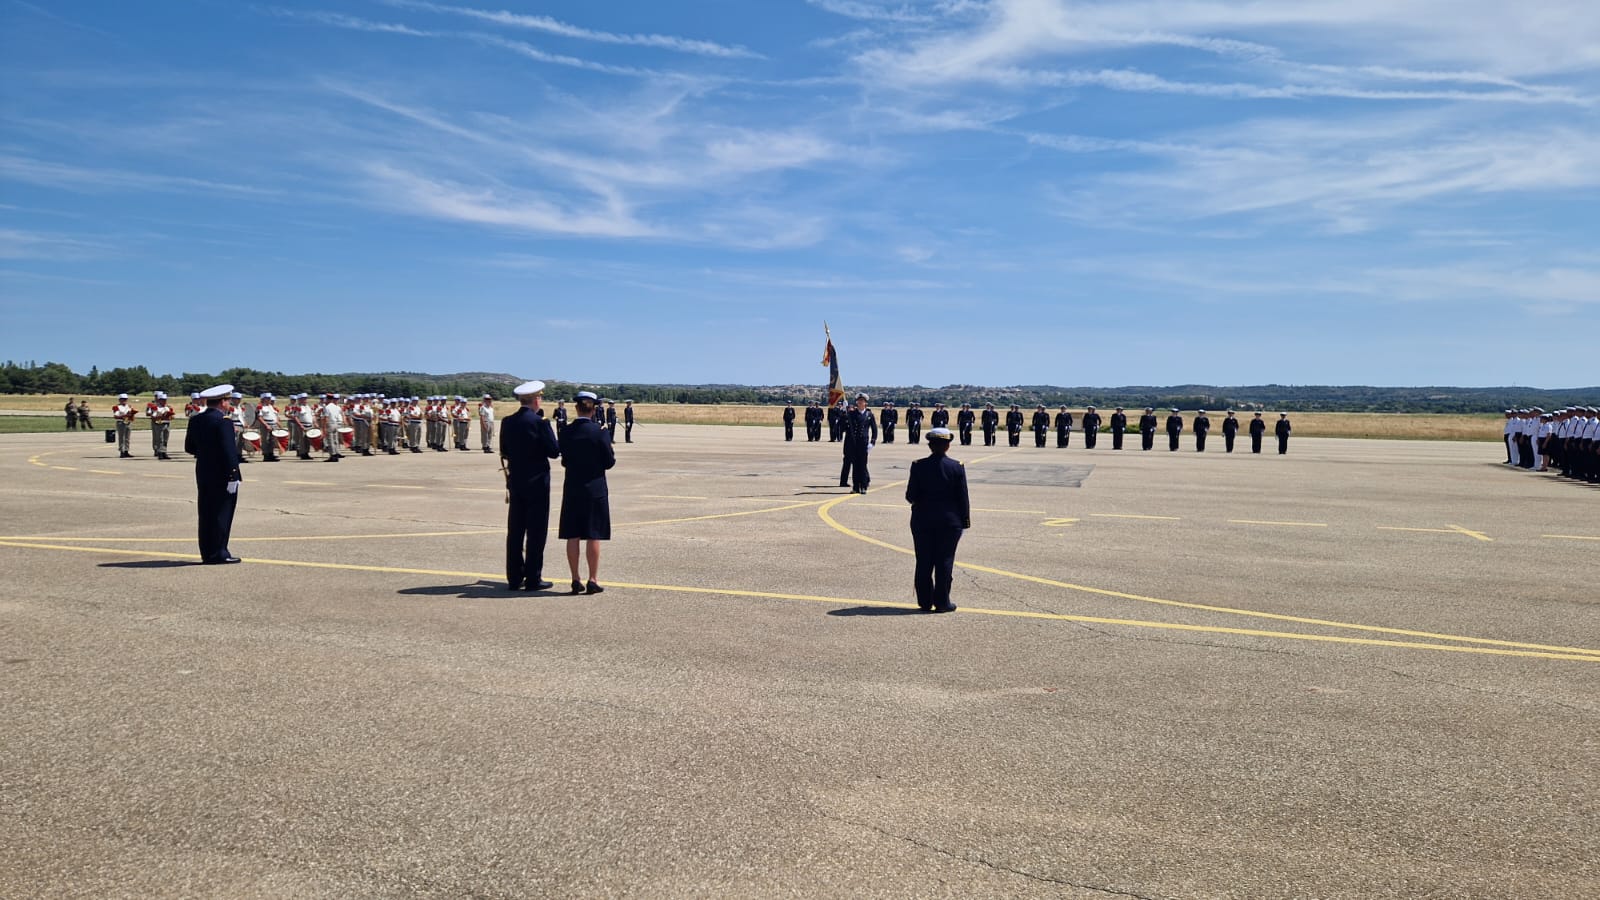 The Institute at the command ceremony of the Commissioners’ Corps of the French Armed Forces